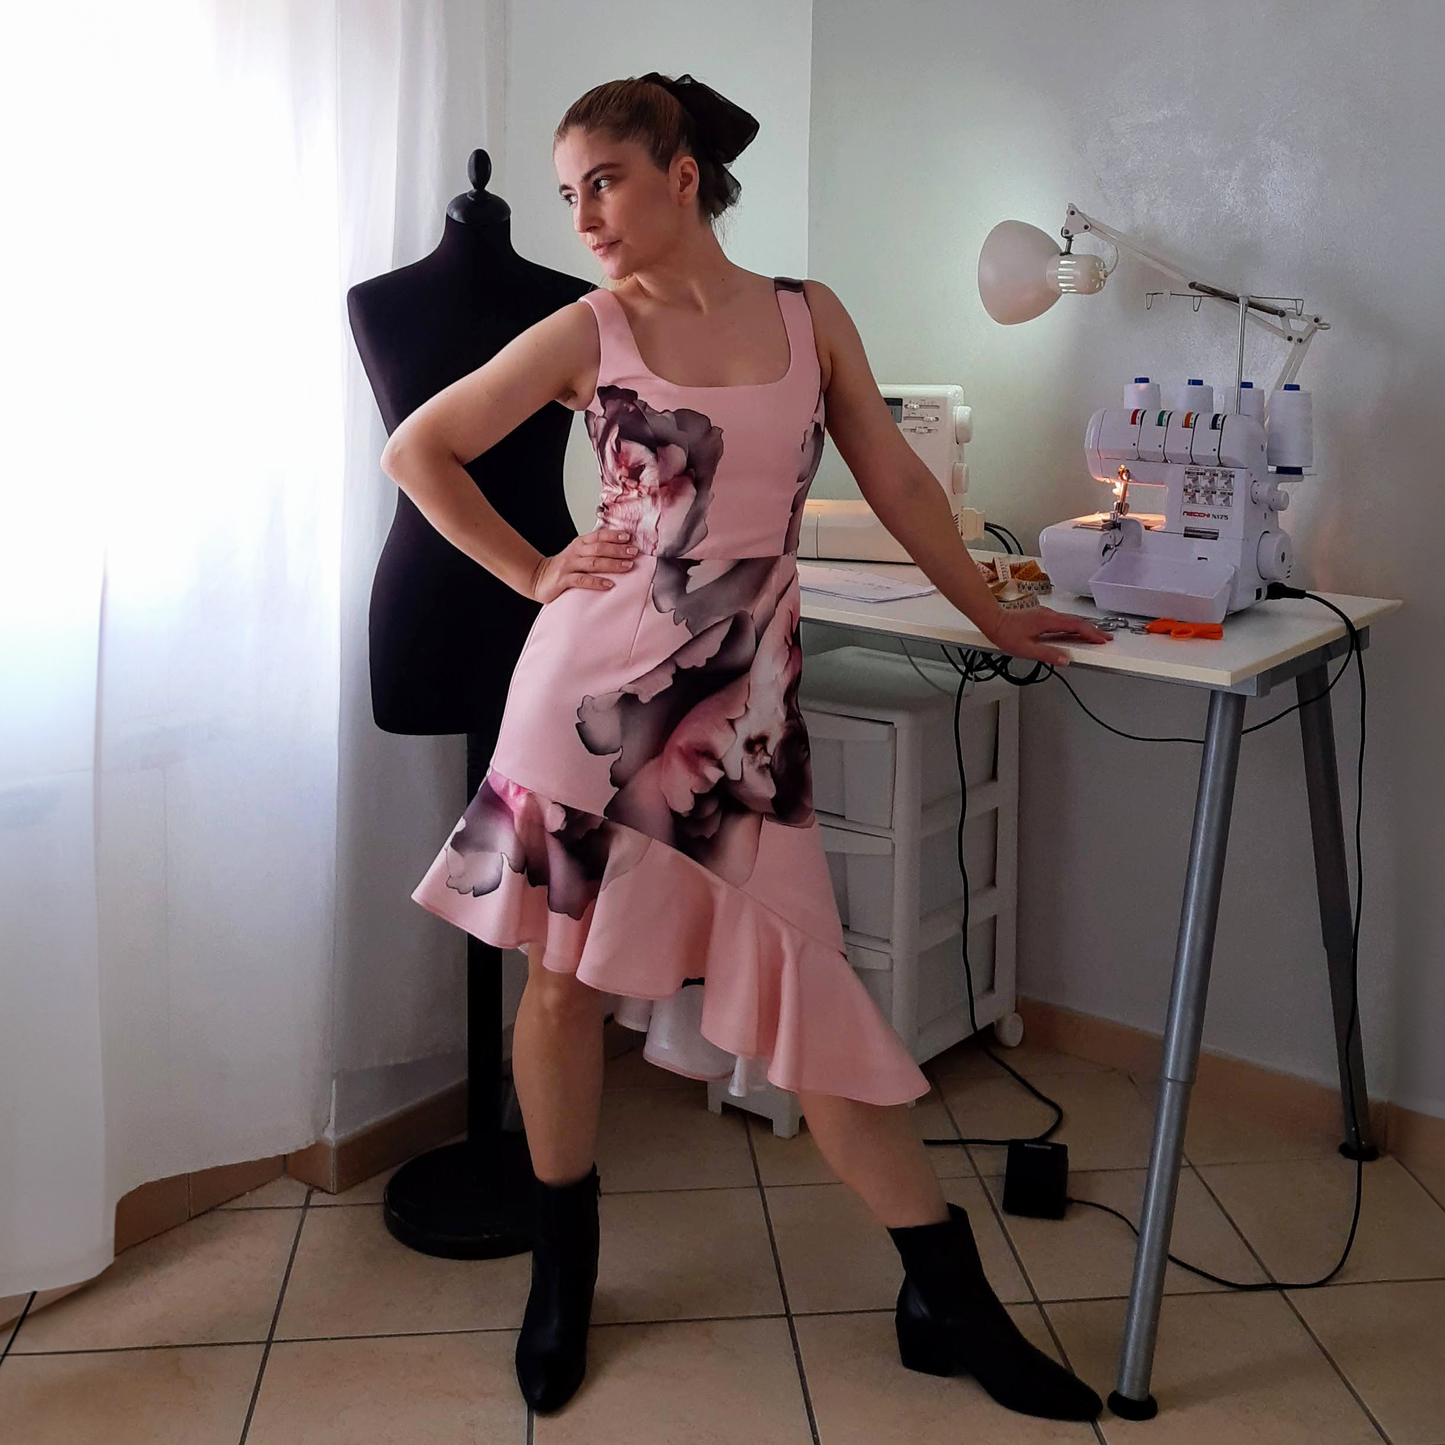 A woman in a pink asymmetric dress poses beside a tailor mannequin amidst sewing machines on a table in the background.